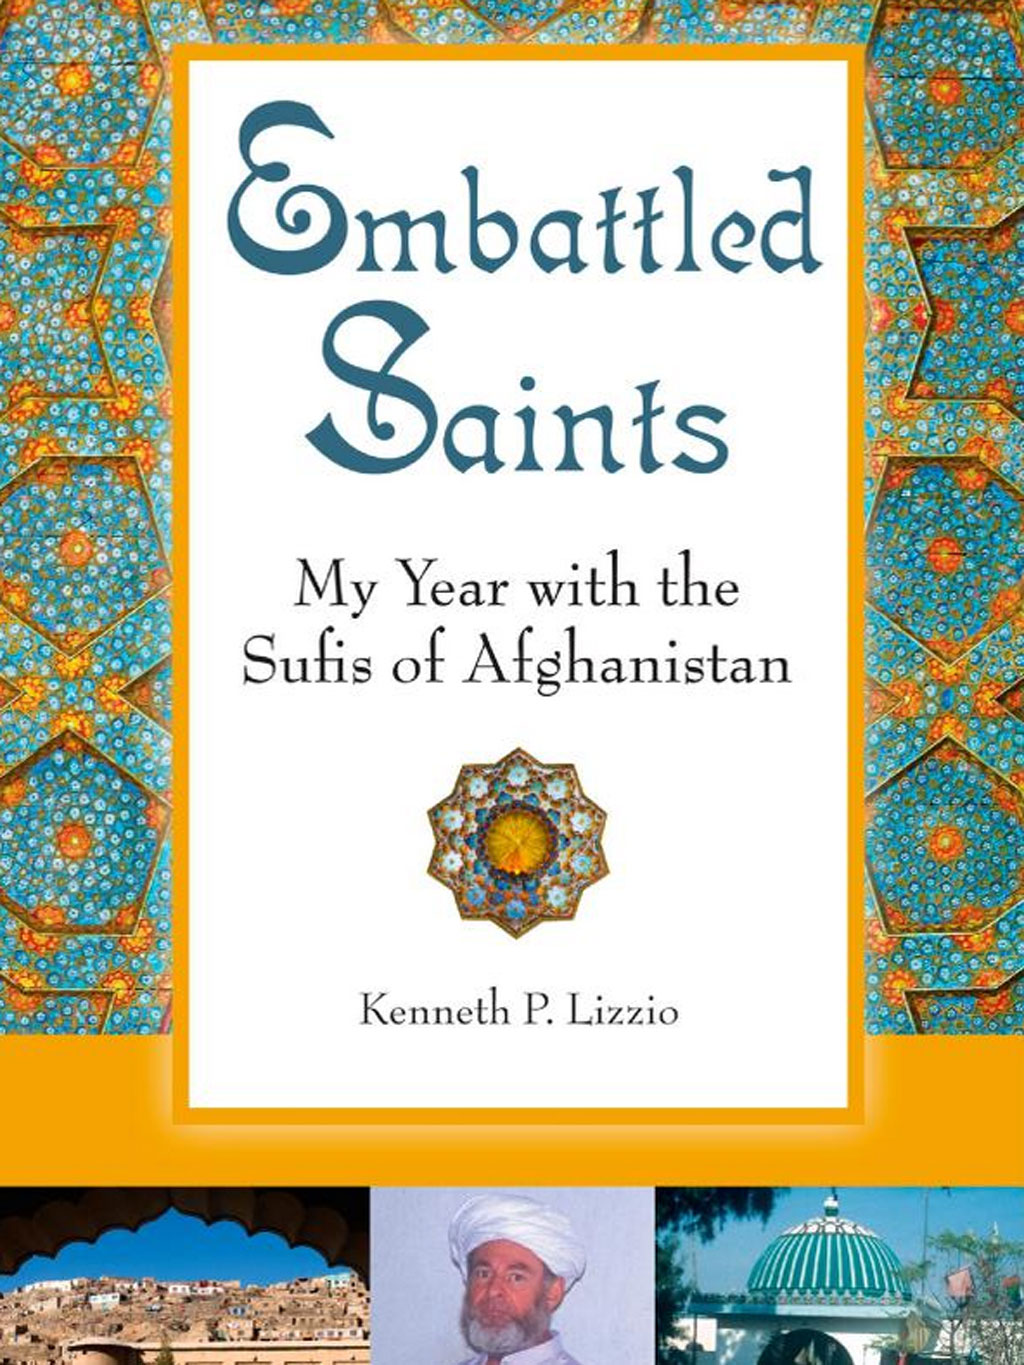 Buchcover von Kenneth P. Lazzios "Embattled Saints - My Year With The Sufis Of Afghanistan"; Foto: Quest Books